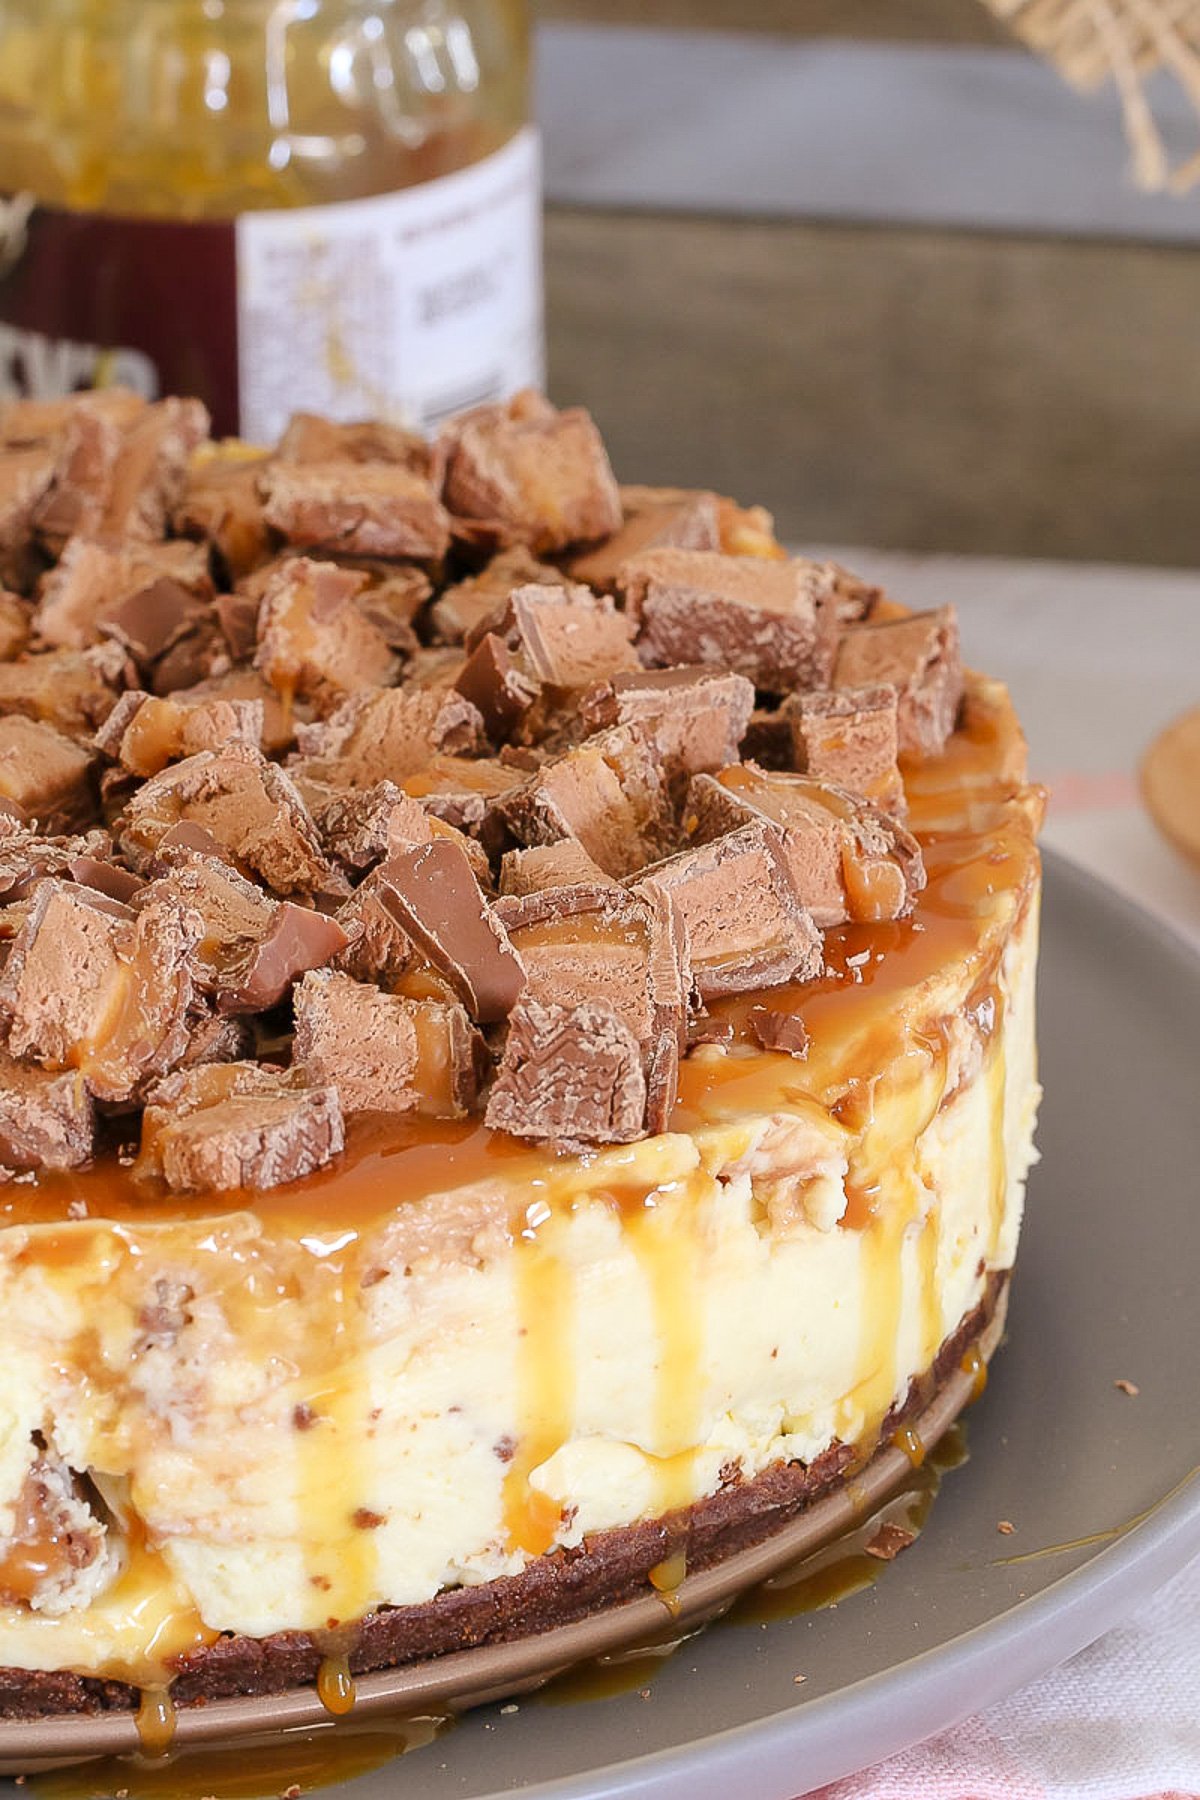 A close up view of a cheesecake topped with chunks of Mars Bars and caramel sauce.